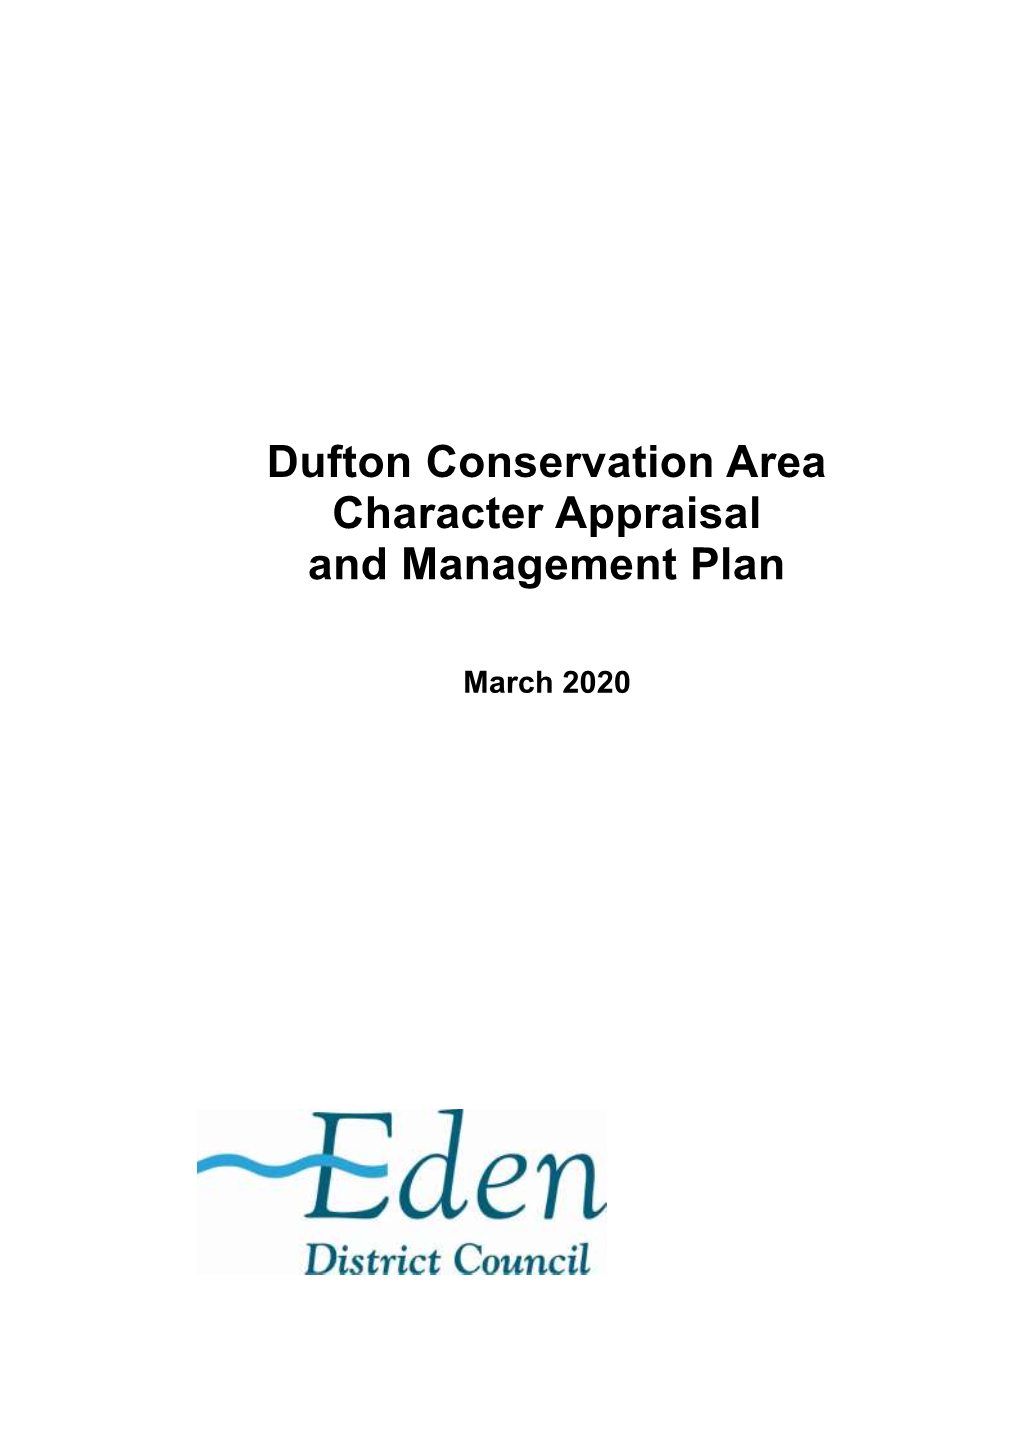 Dufton Conservation Area Character Appraisal and Management Plan